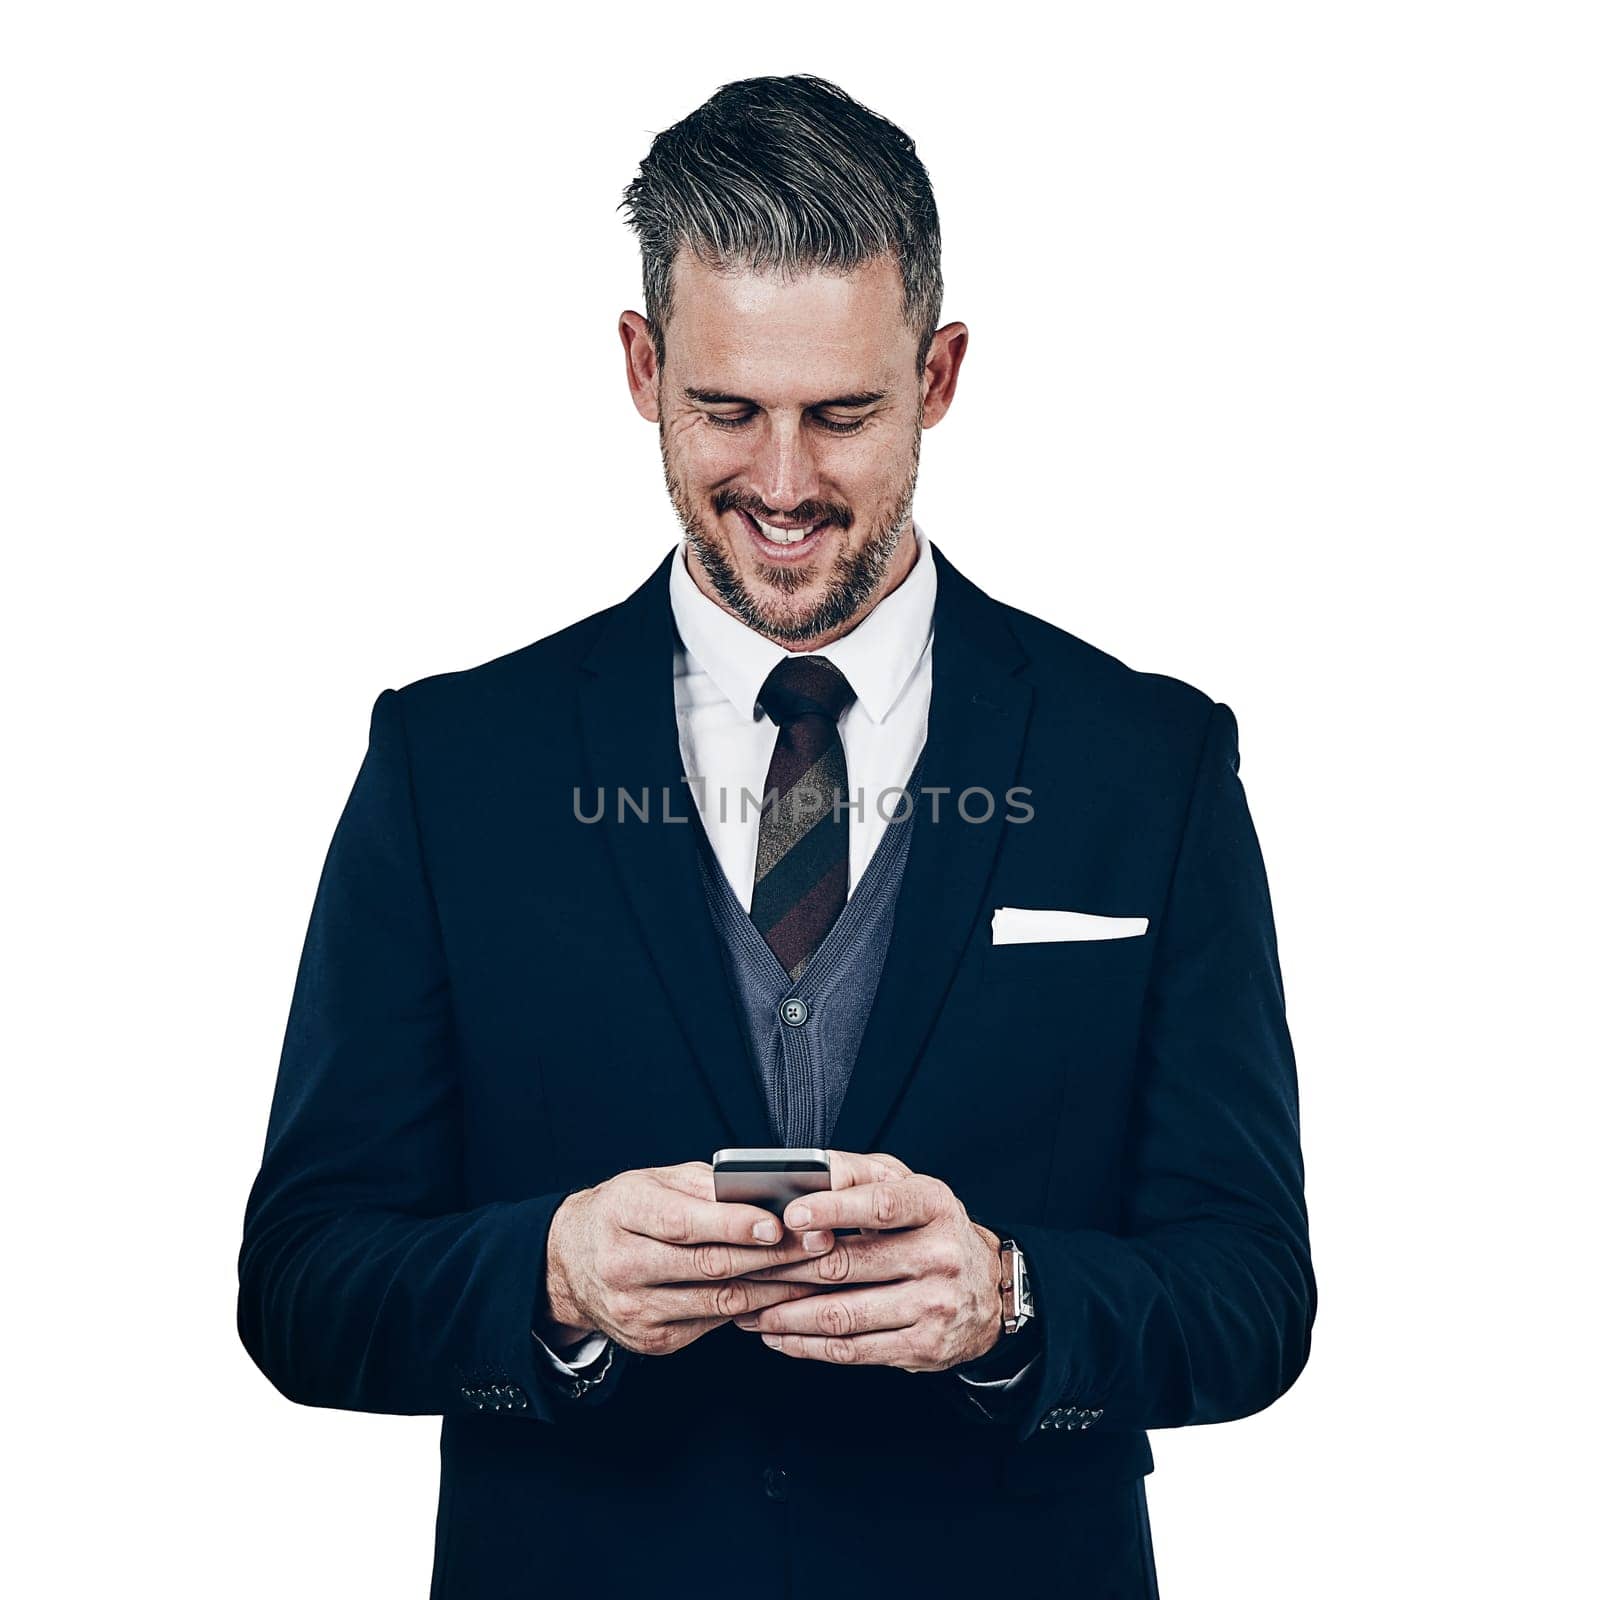 Downloading apps that support his executive needs. Studio shot of a businessman using a mobile phone against a white background. by YuriArcurs